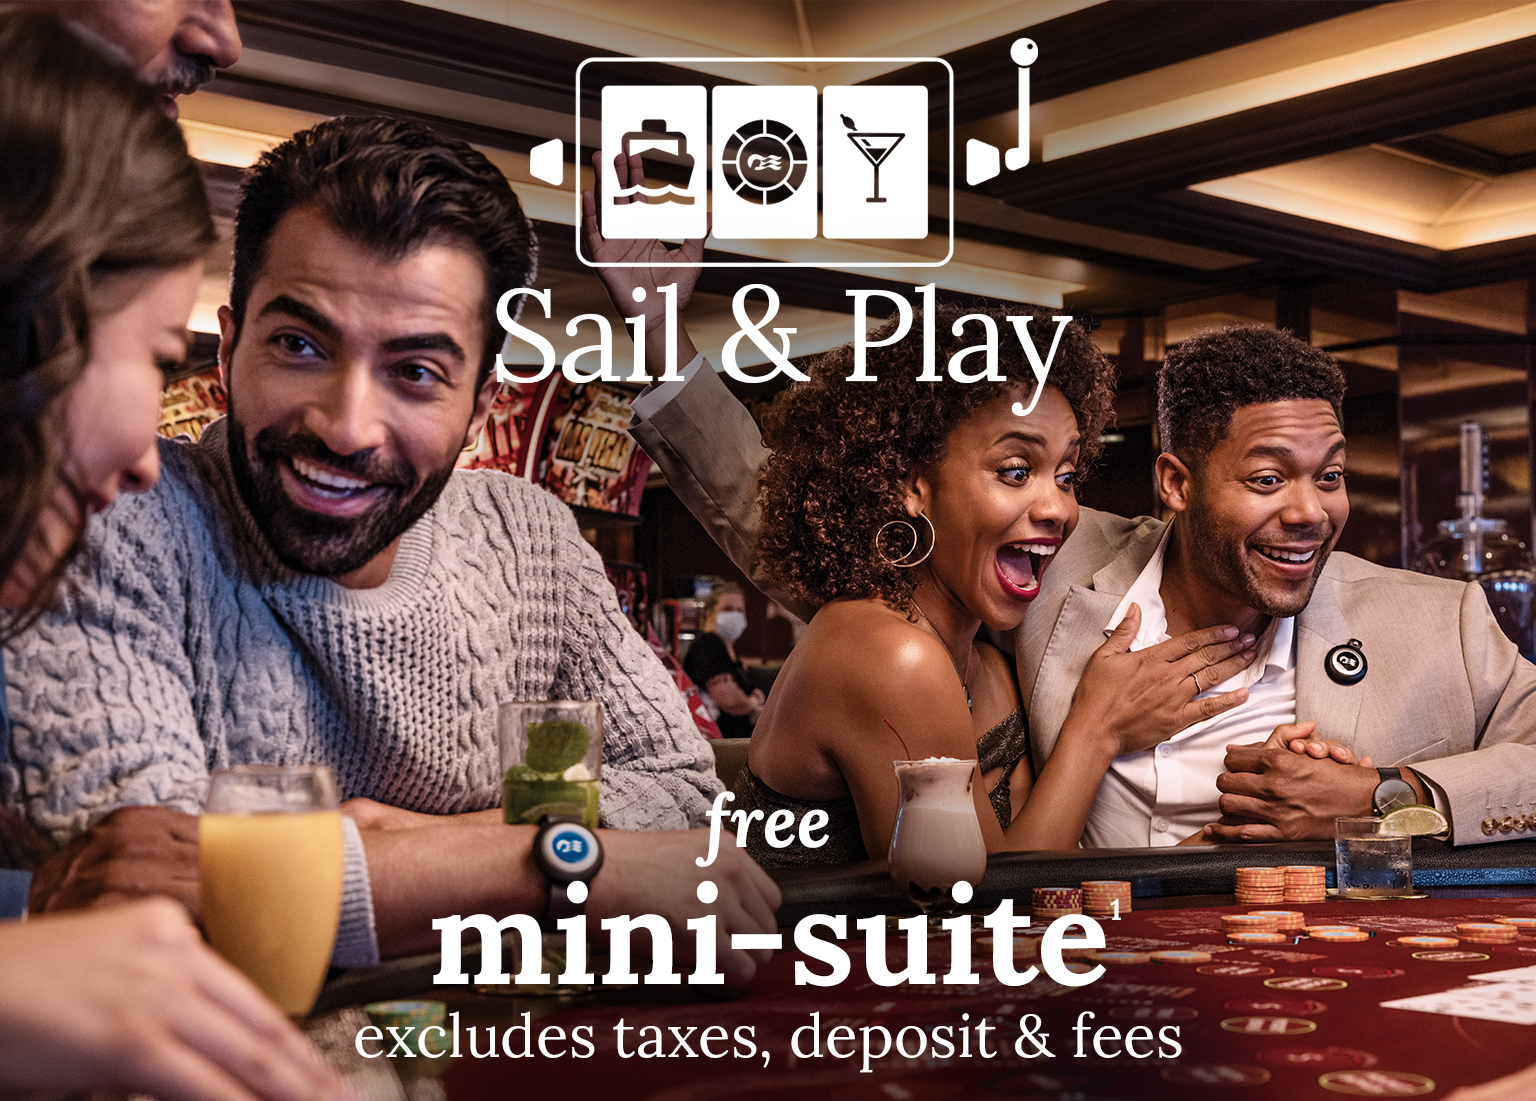 Group of people playing table poker. free mini-suite, excludes taxes, deposit & fees. Click here to book.